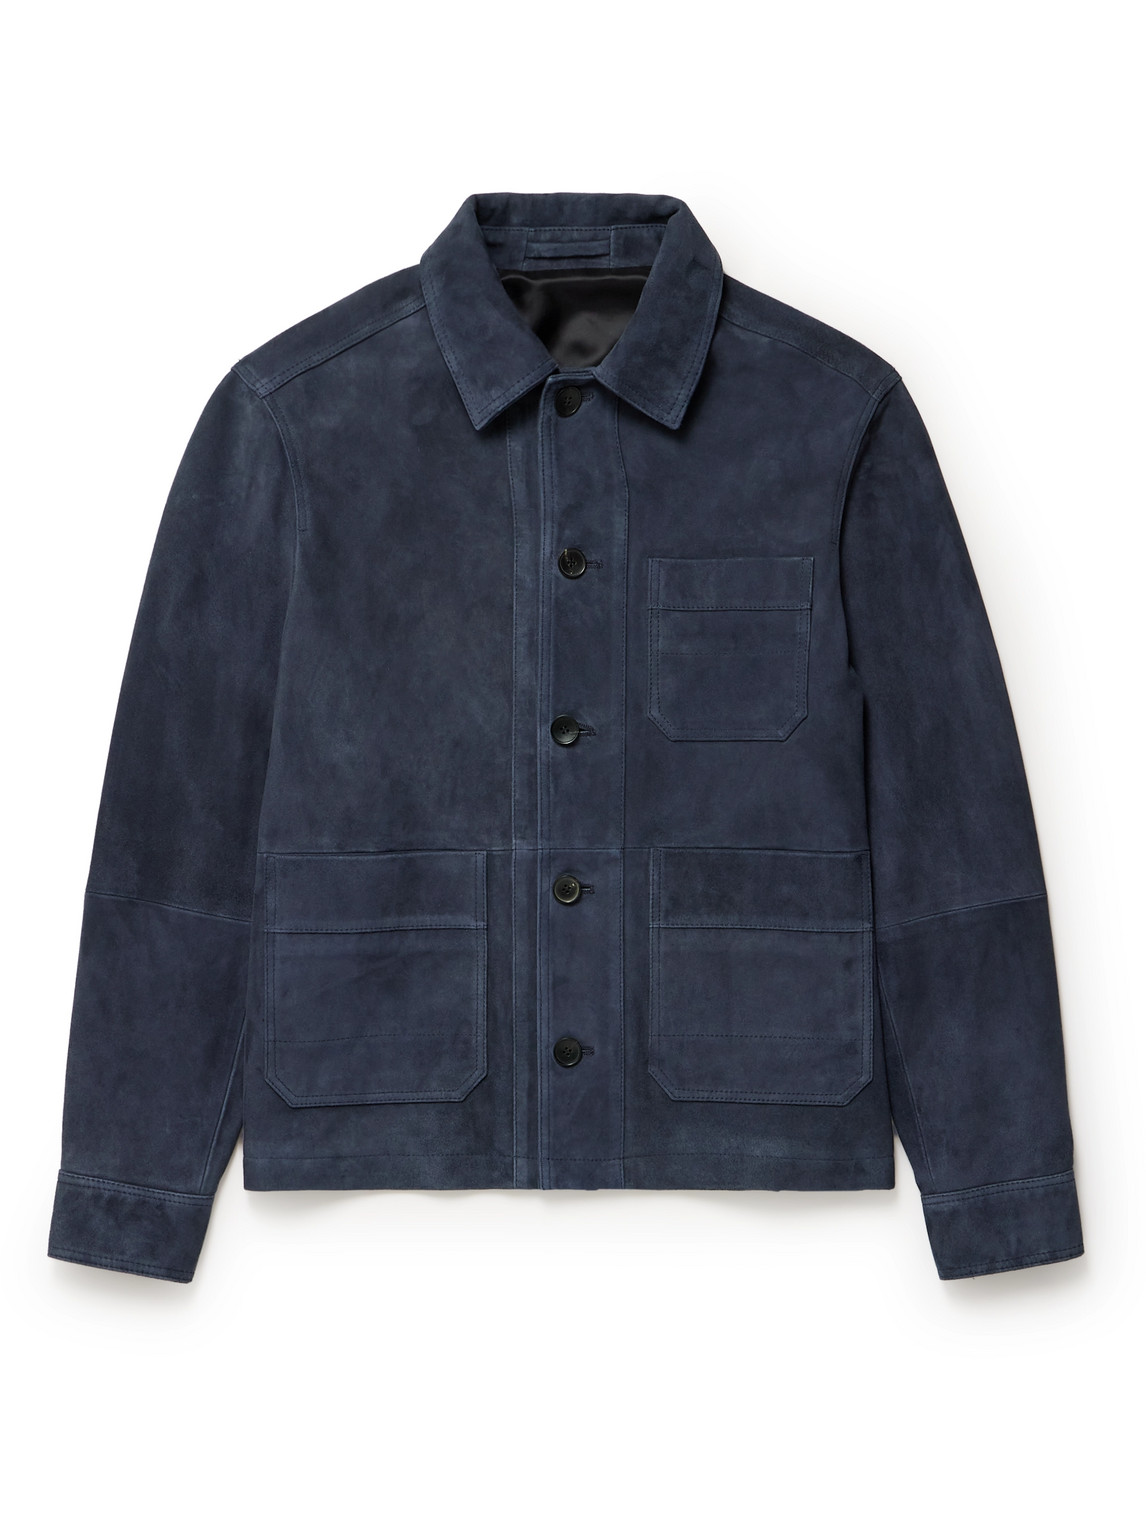 Mr P Suede Chore Jacket In Blue